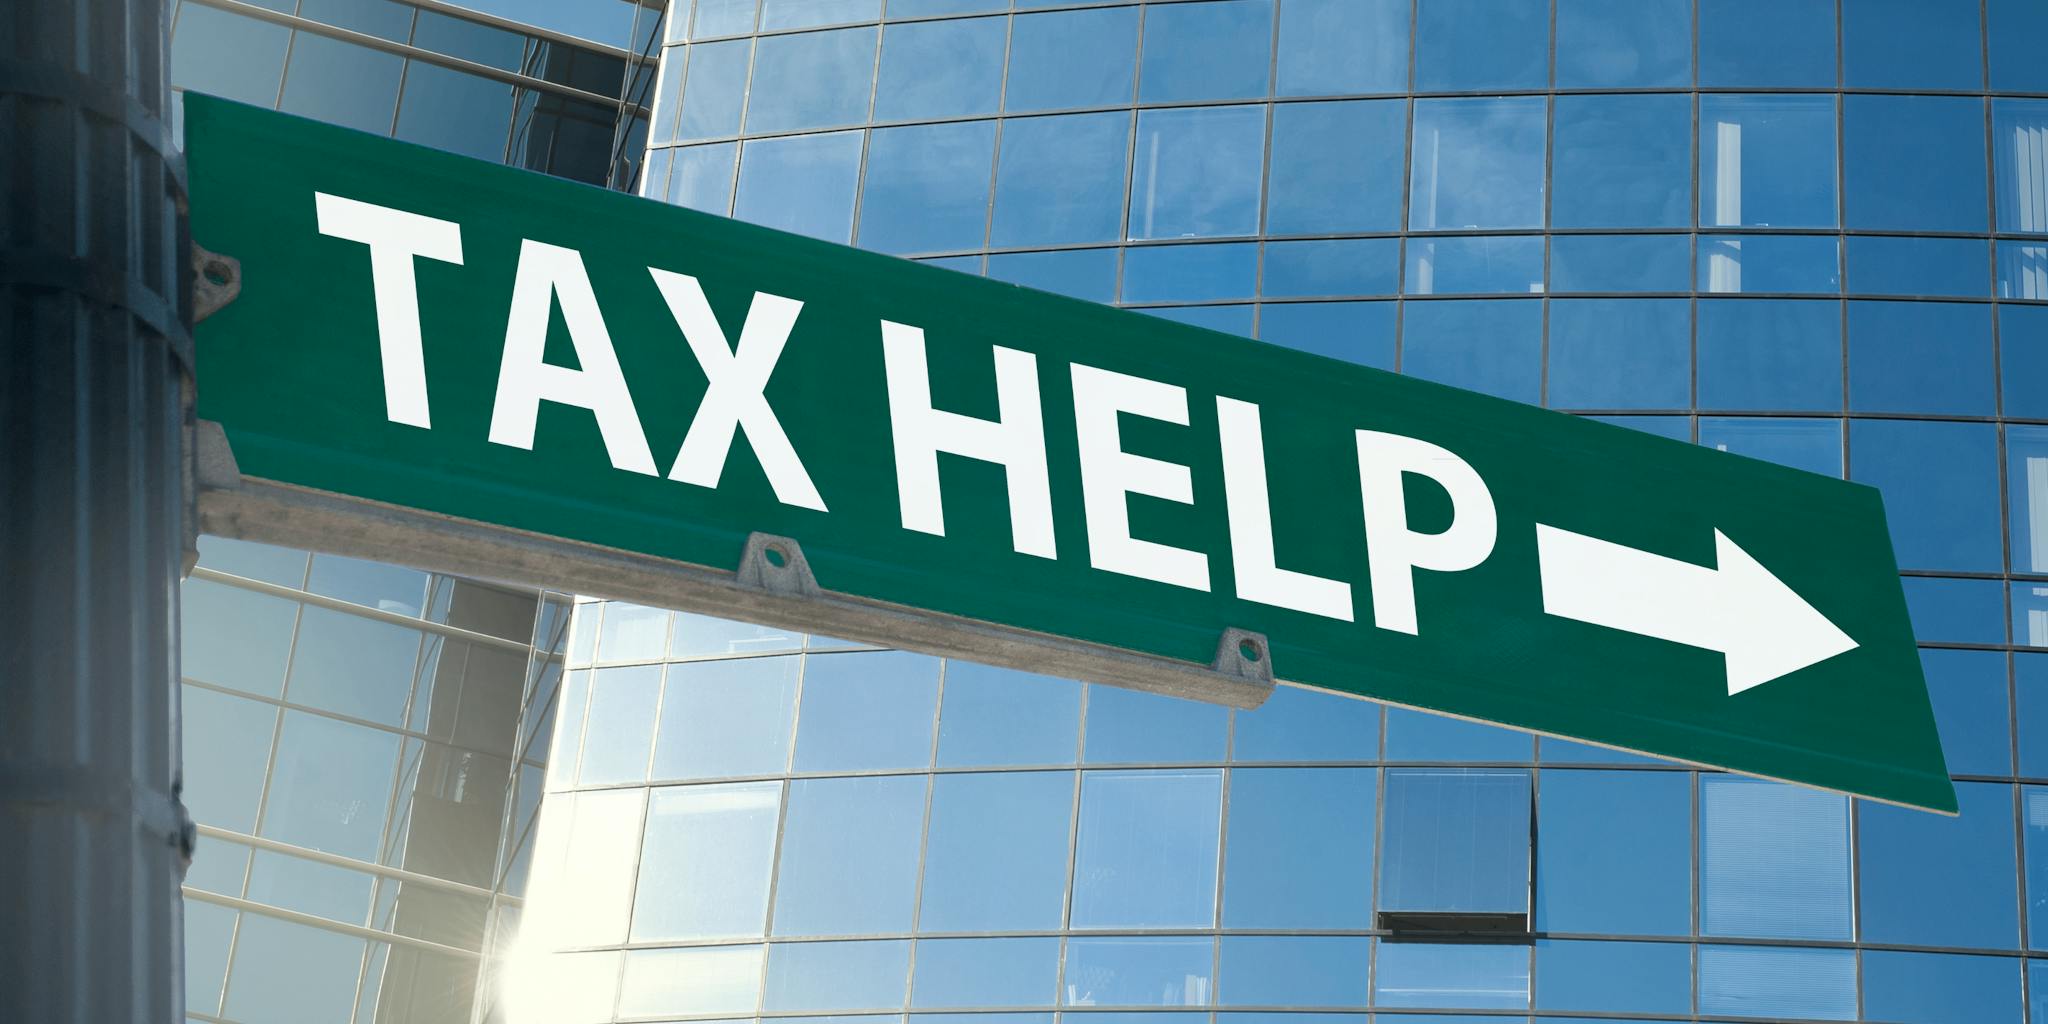 Street sign with tax help in white writing with an arrow.